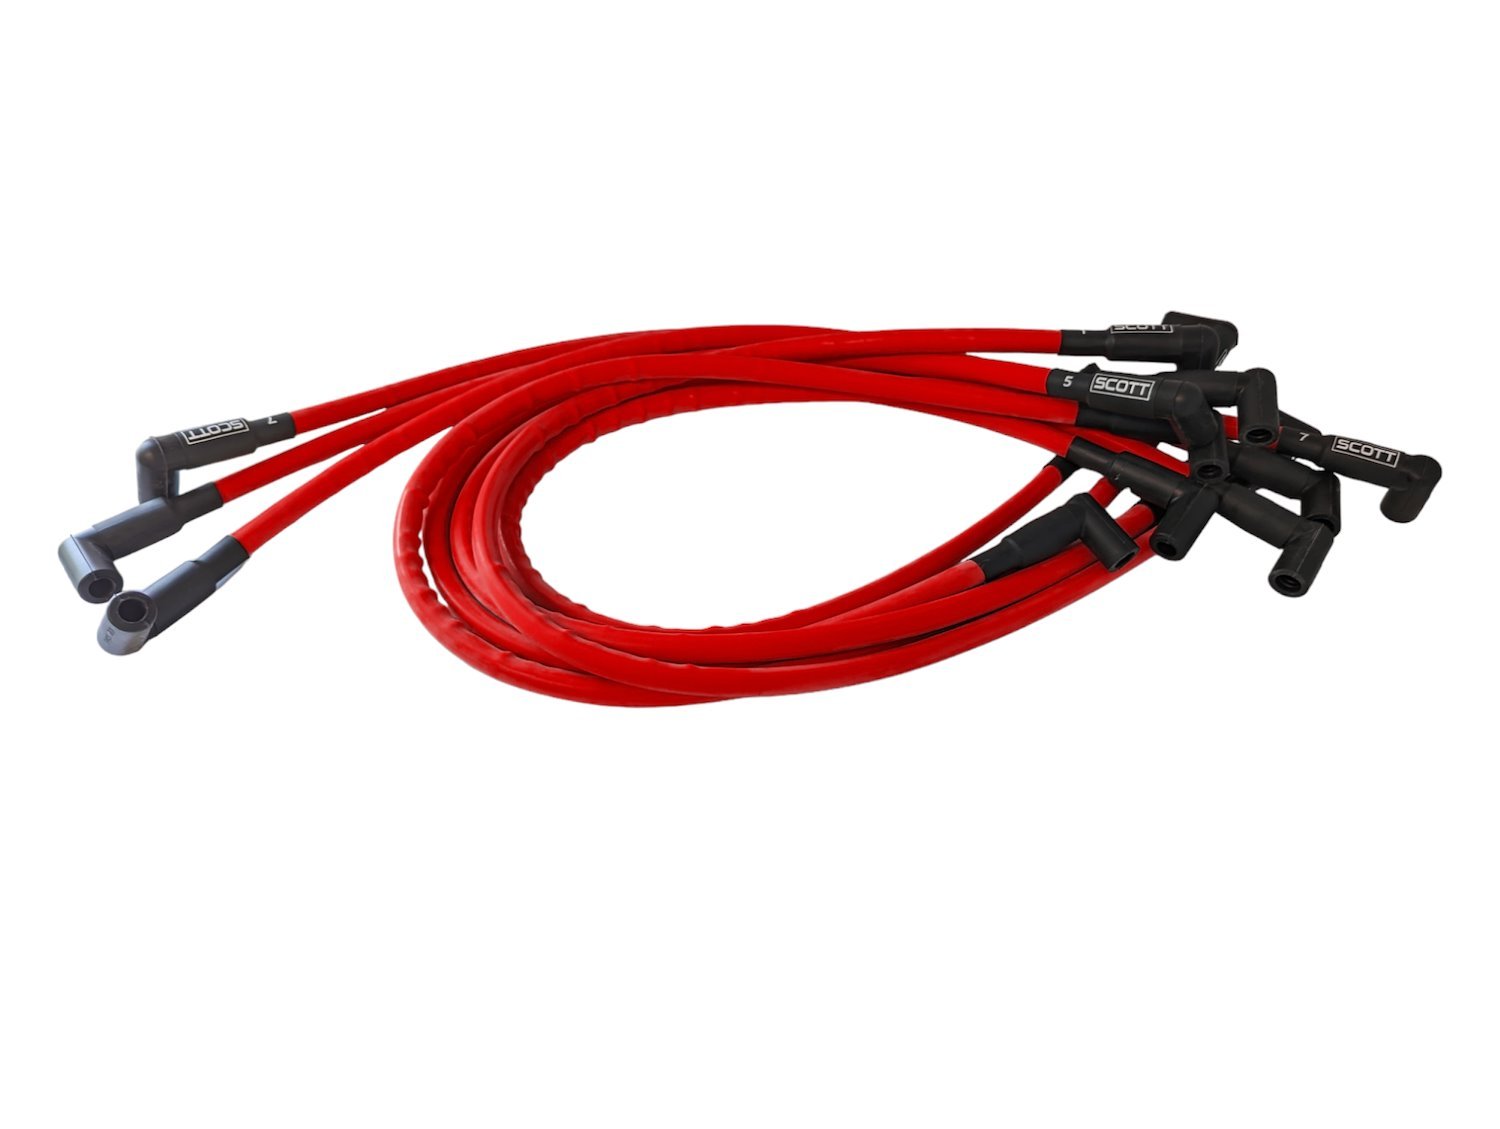 SPW300-CH-407-2 Super Mag Fiberglass-Oversleeved Spark Plug Wire Set for Small Block Chevy, Under Header [Red]